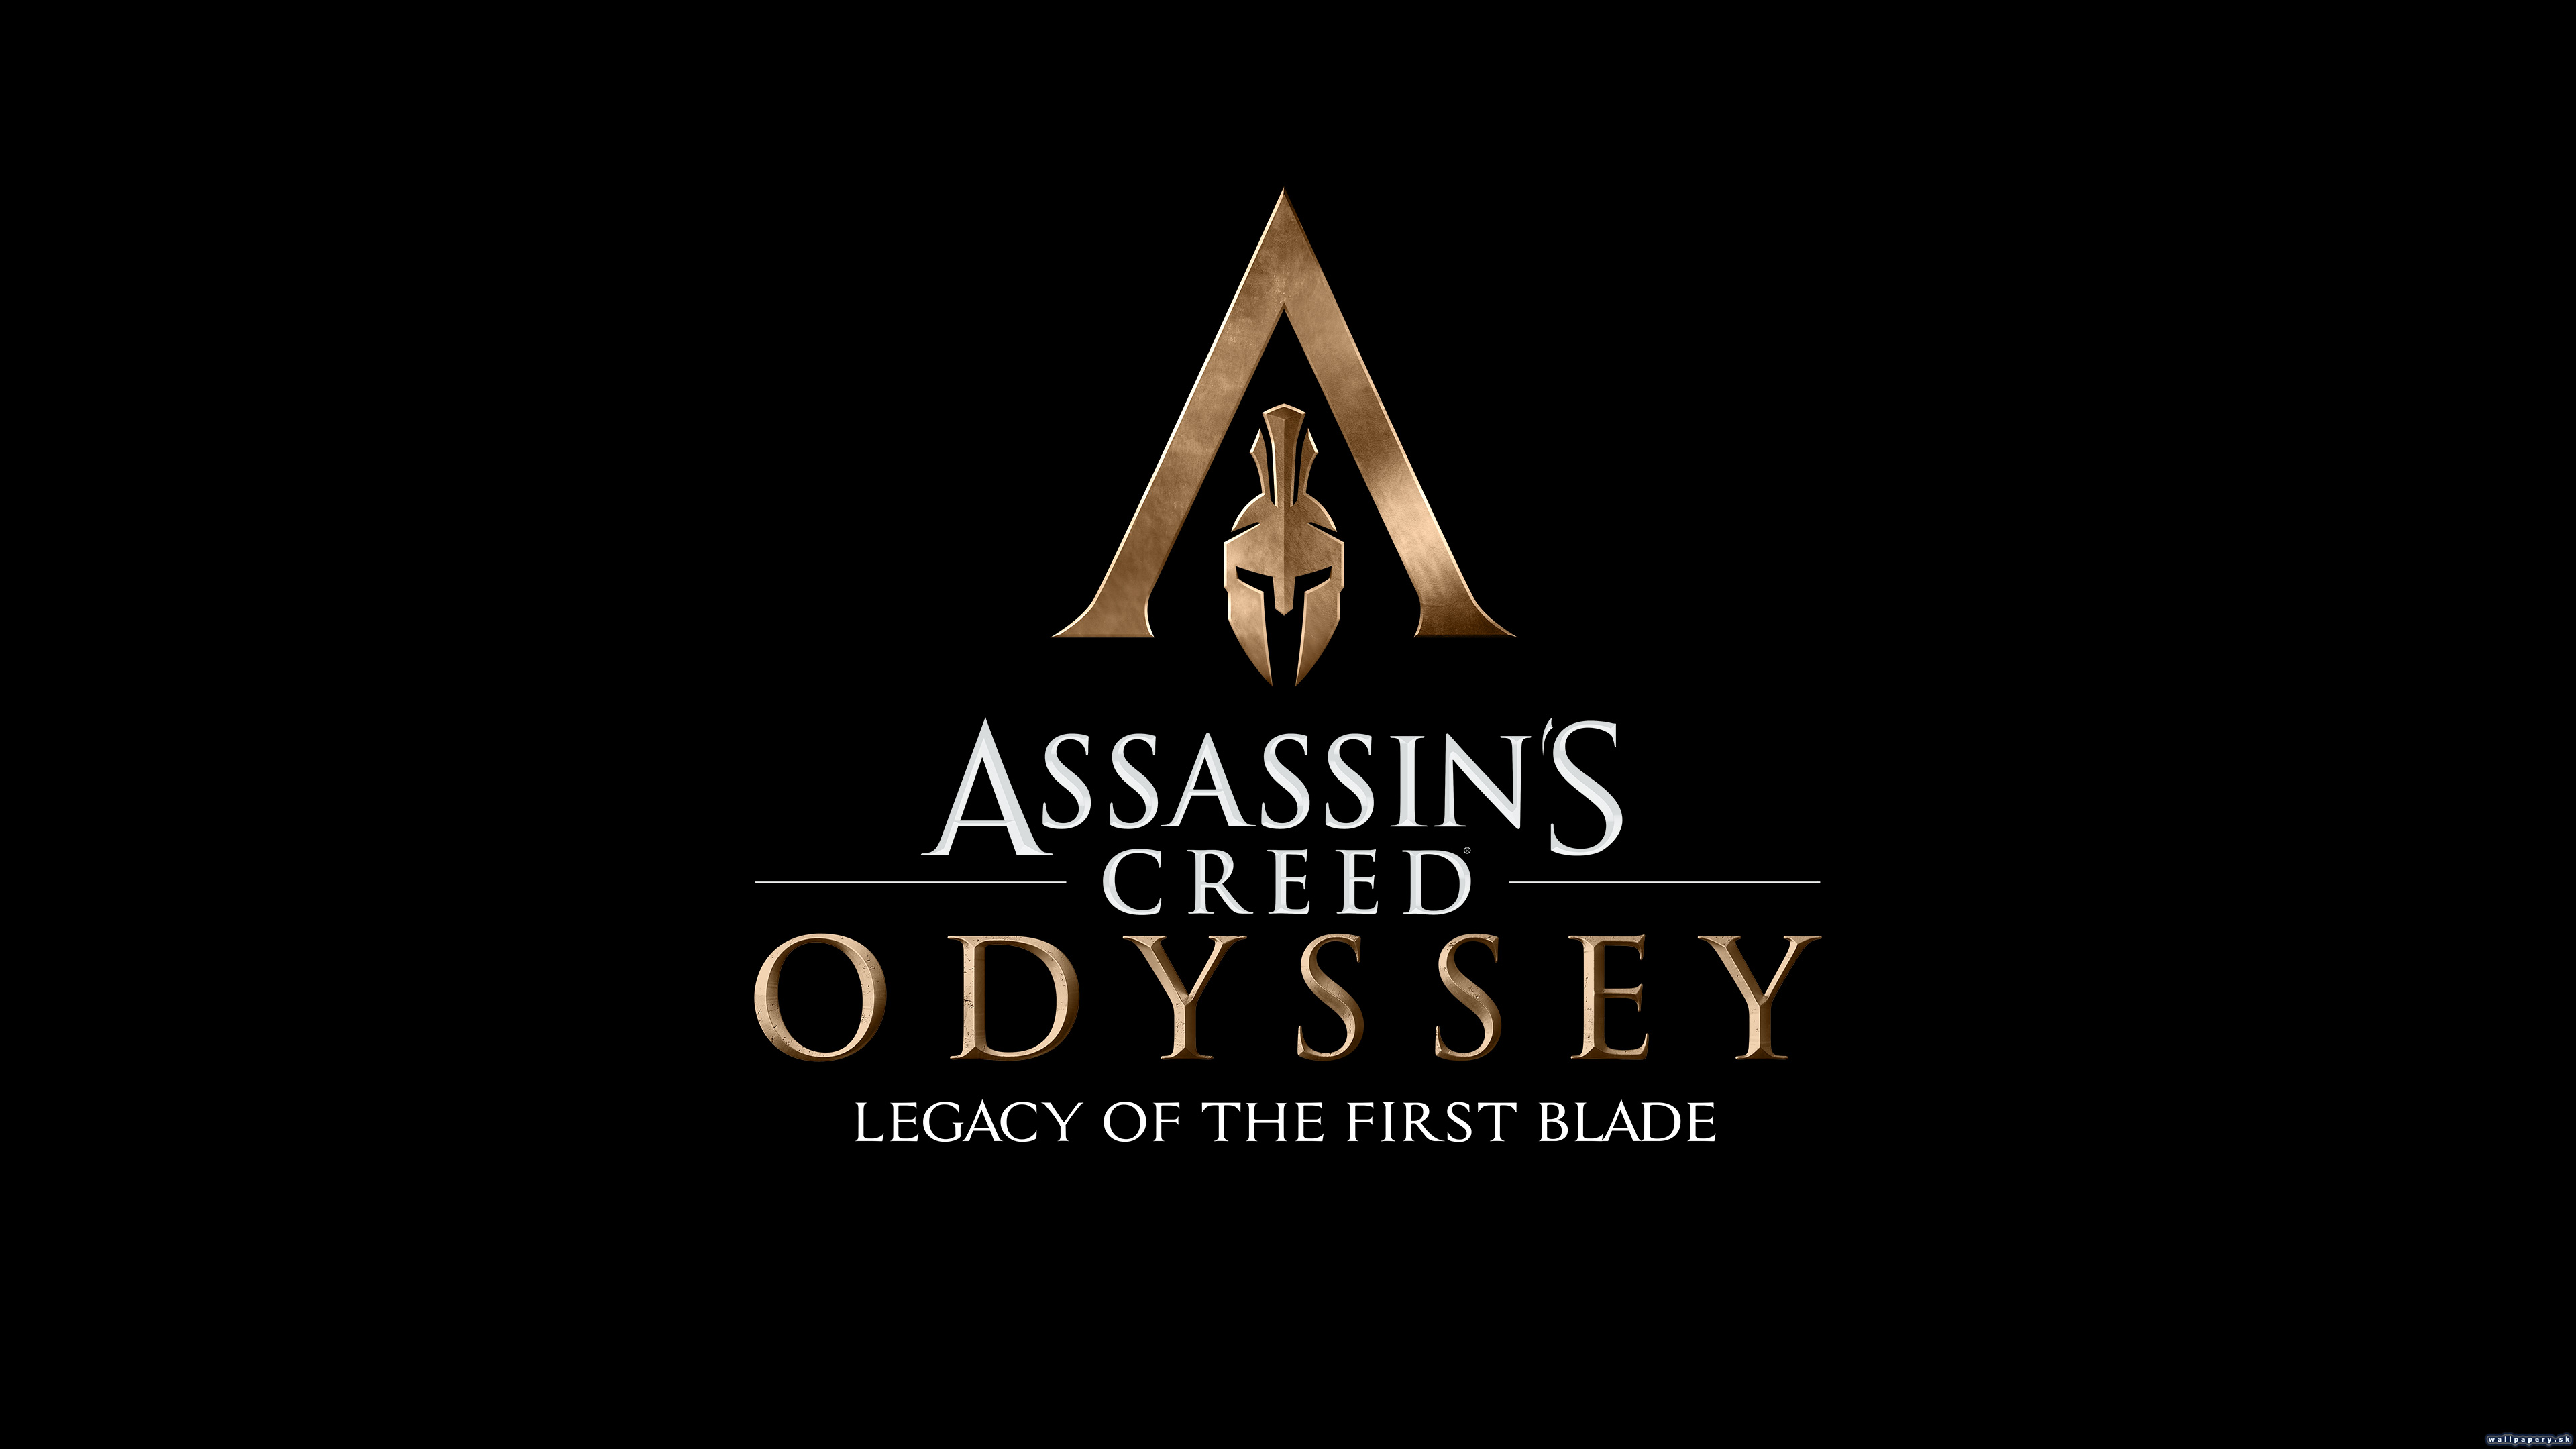 Assassin's Creed: Odyssey - Legacy of the First Blade - wallpaper 3